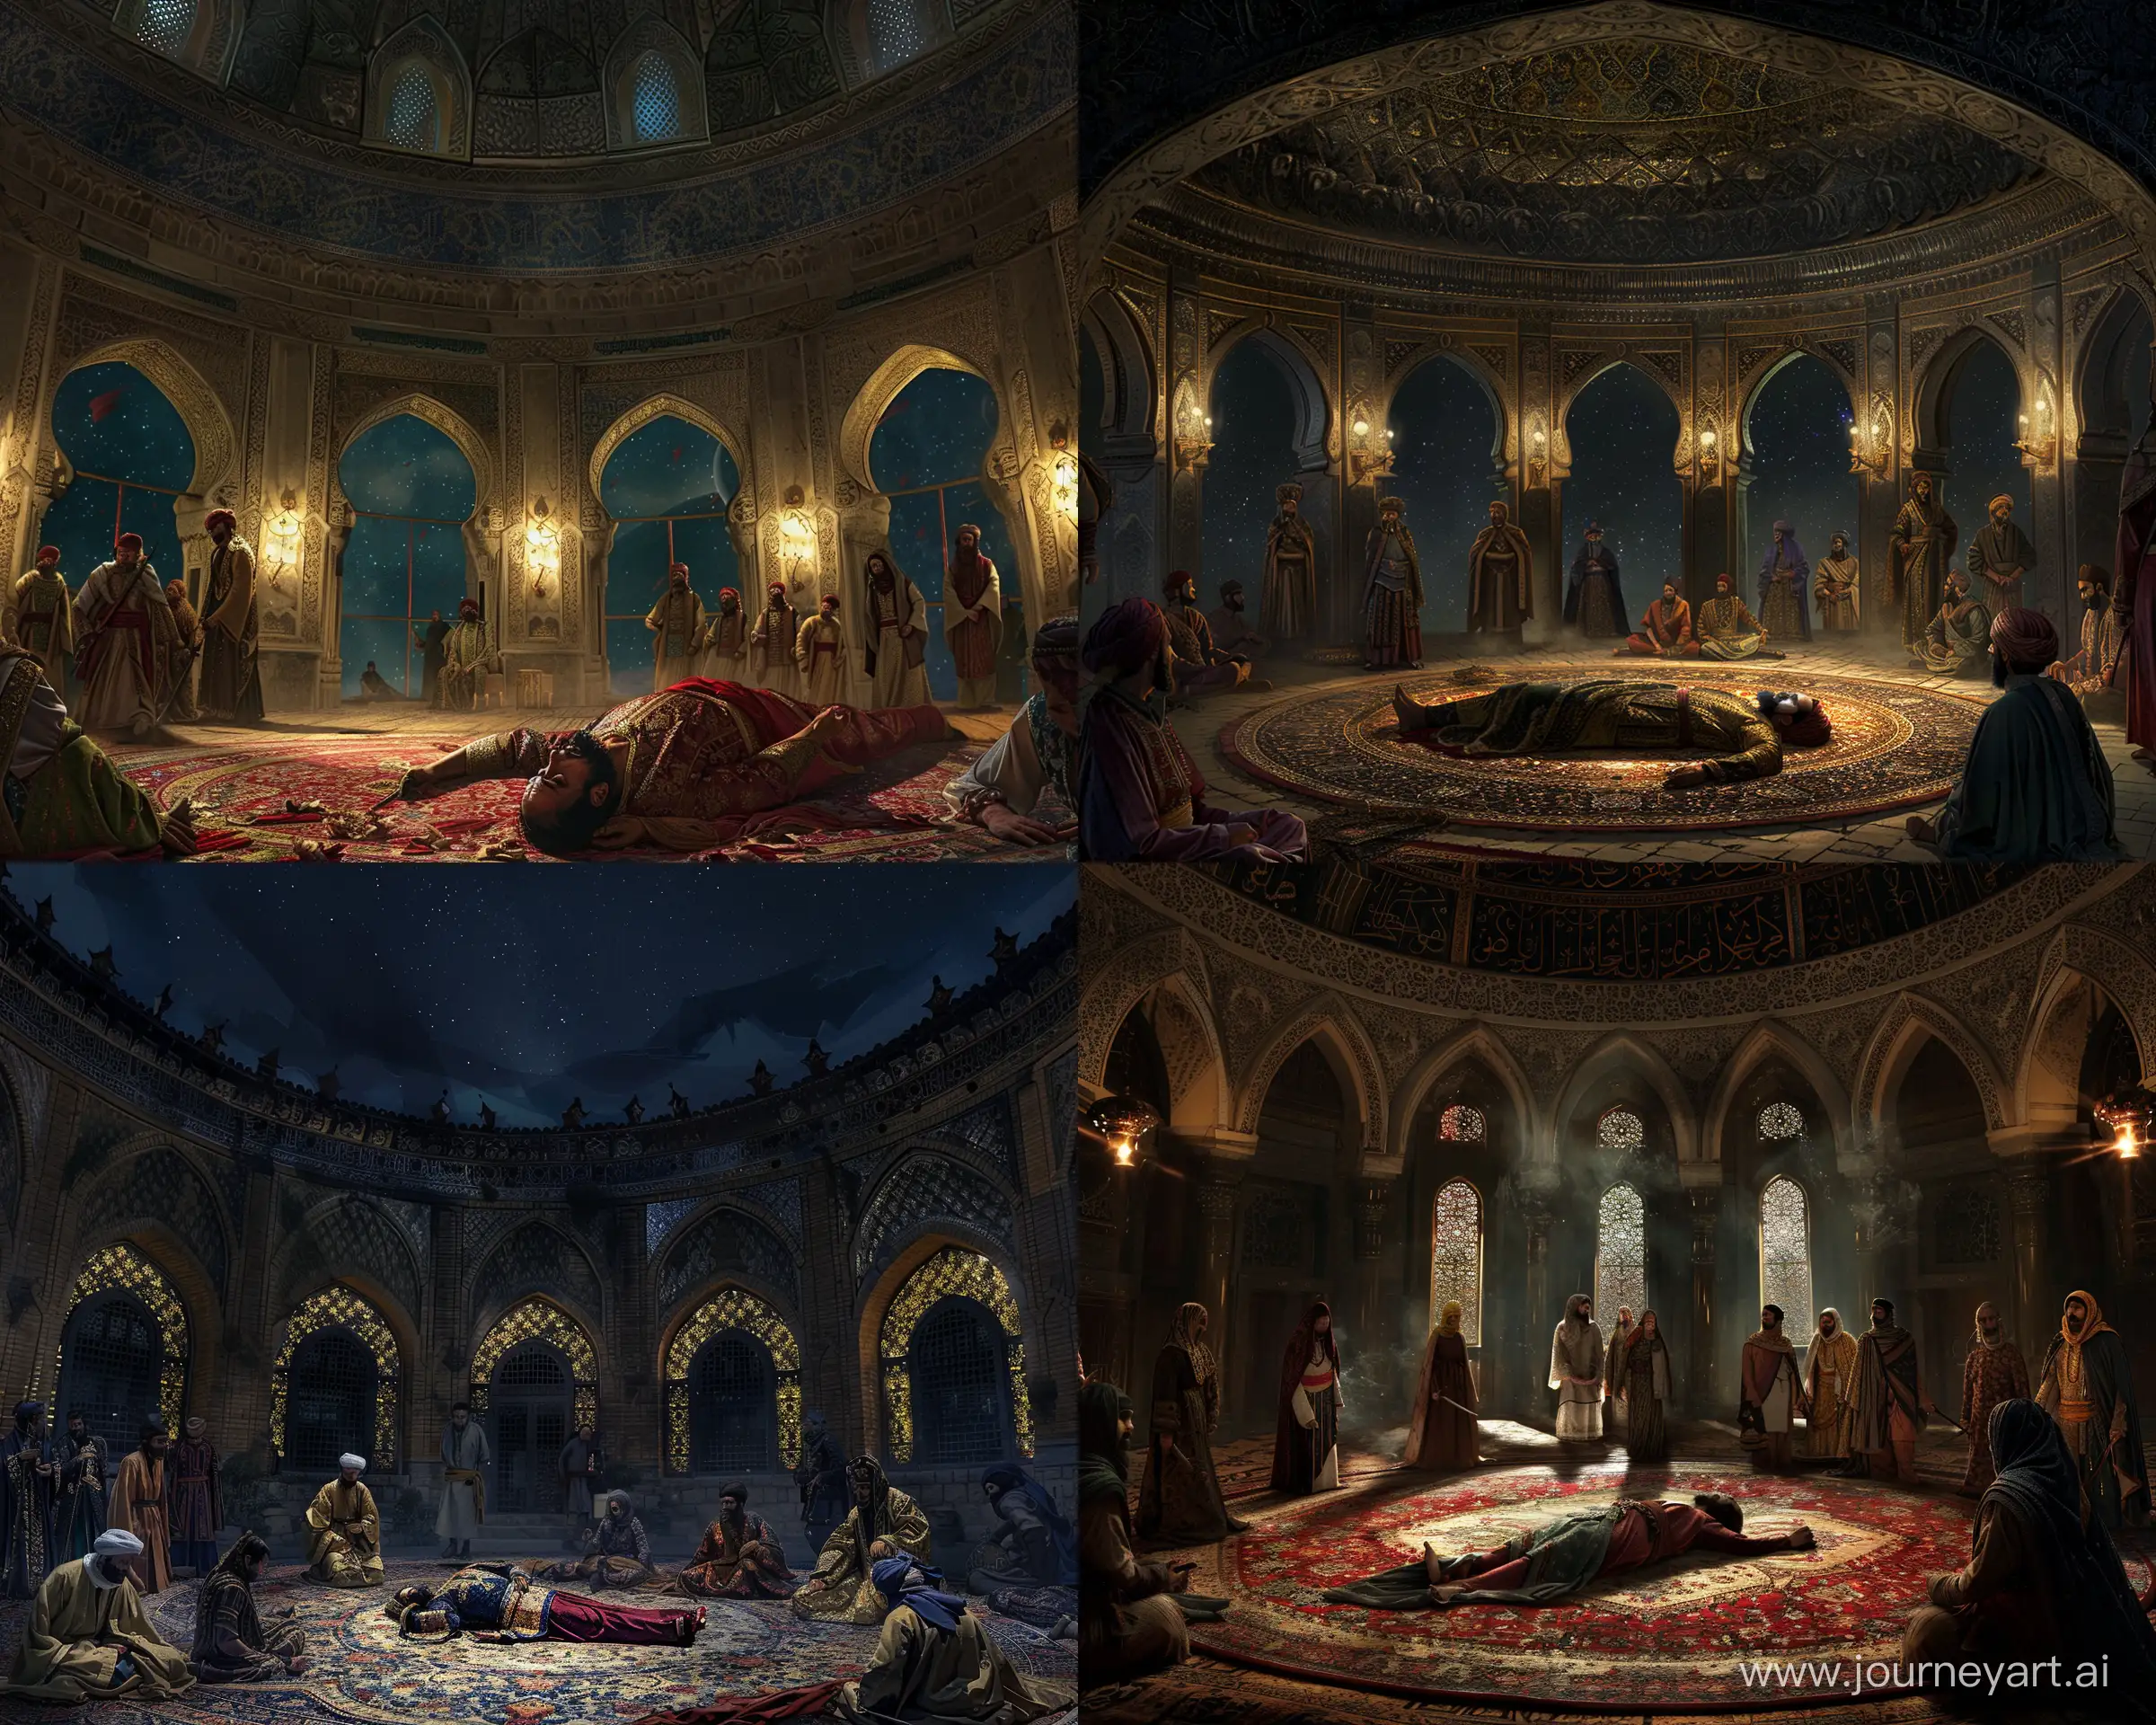 inside of a round hall with muqarnas covered ceiling and persian arch windows, a dead prince lying on the persian carpet surrounded by ottoman janissarys, night --ar 5:4